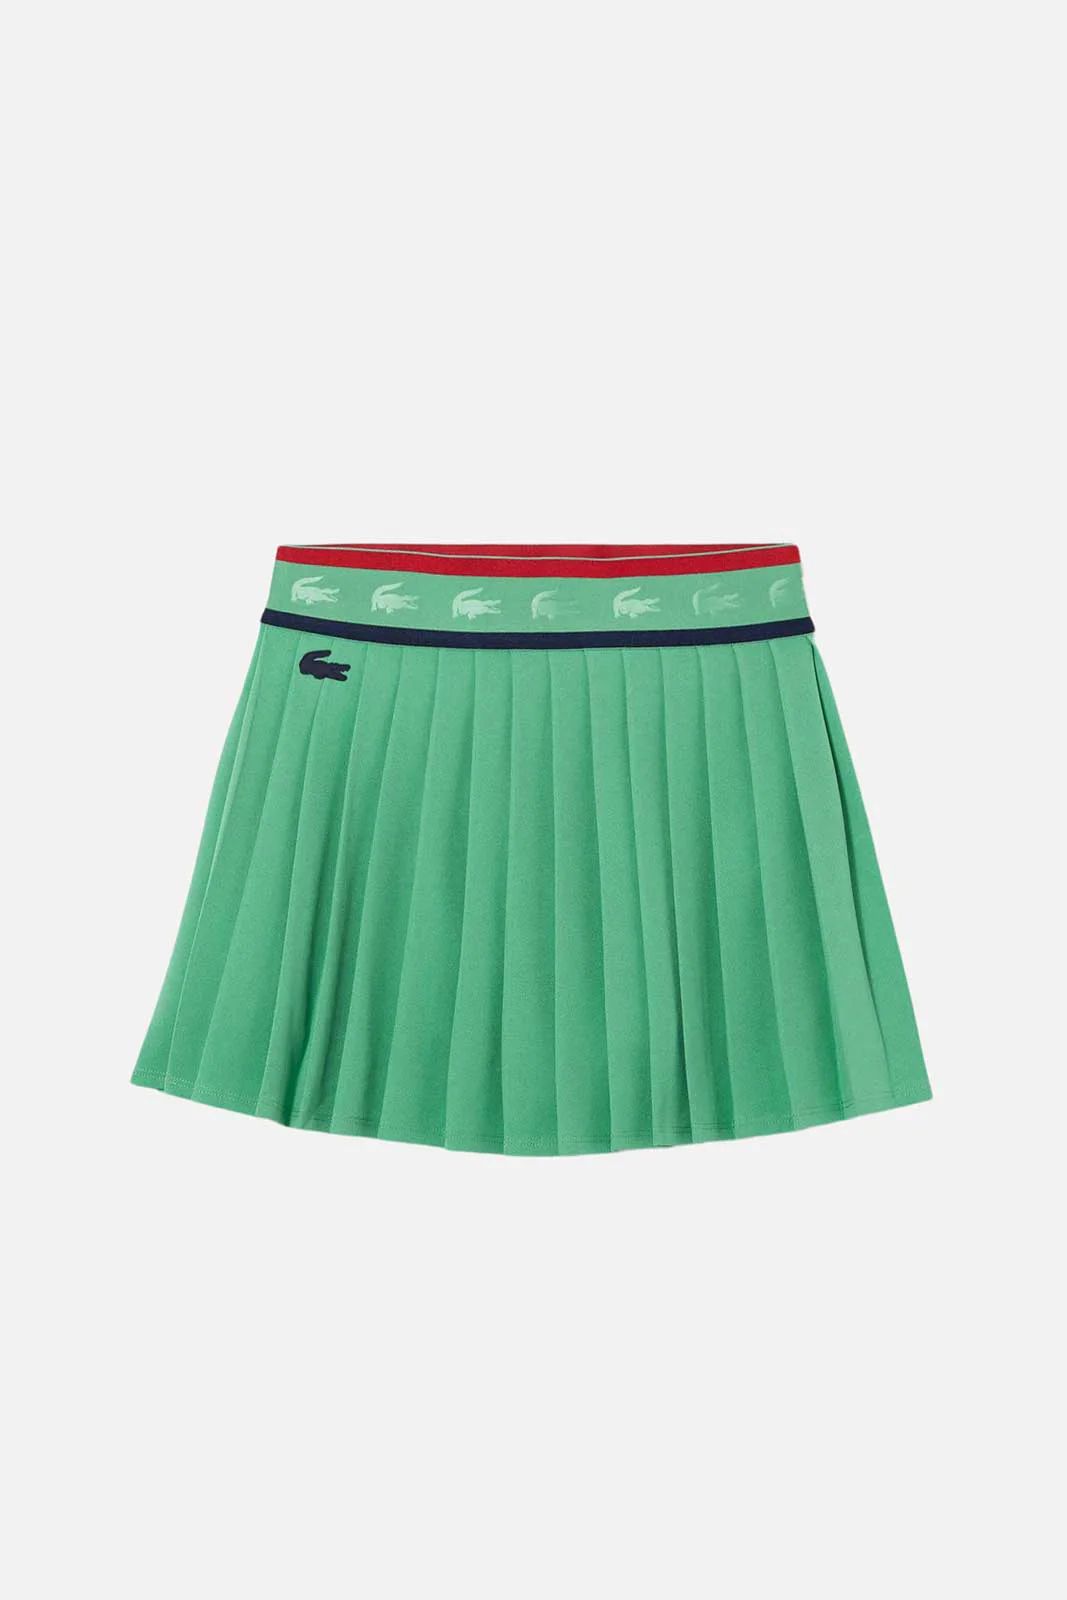 Pleated Tennis Skirt with Croc TapeLacosteNew$95.00 | Bandier